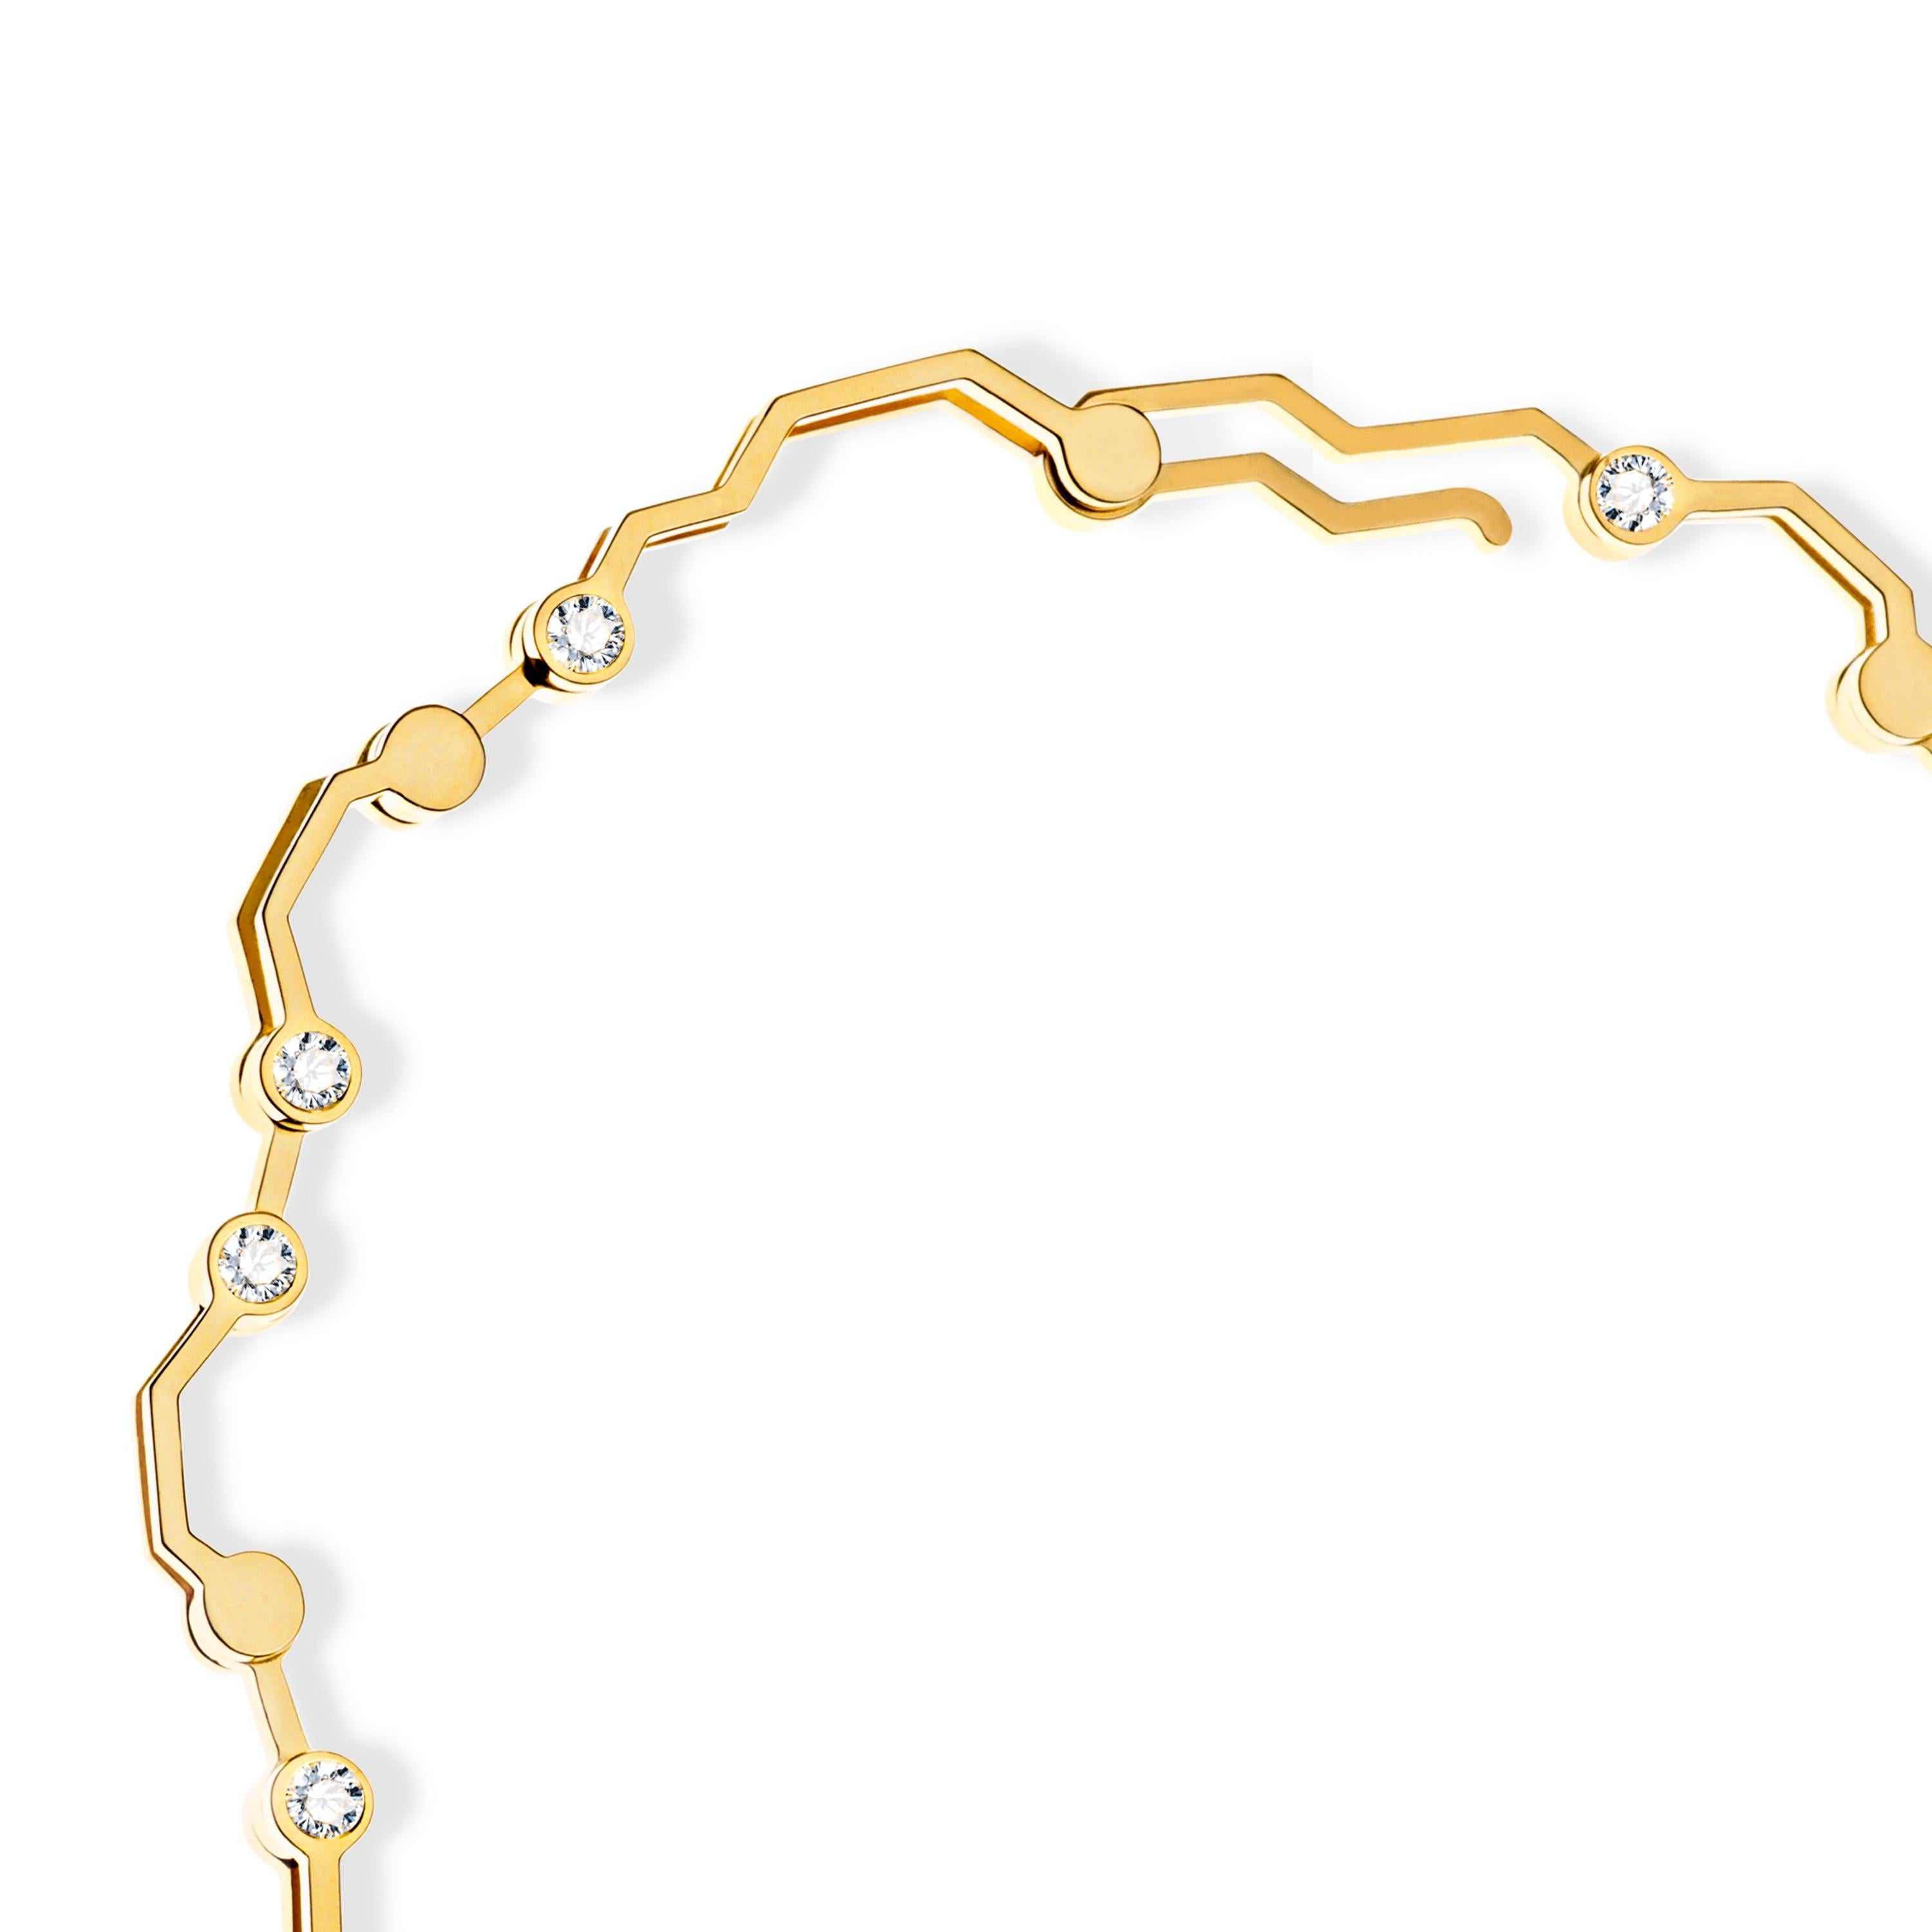 Made by hand in Nathalie Jean studio, Circuit Link Bracelet is in 18-carat yellow gold and diamonds (carat total weight 0,324). Printed circuit boards change scale and become precious. As if by magic, copper is transmuted into gold. Delicate strips